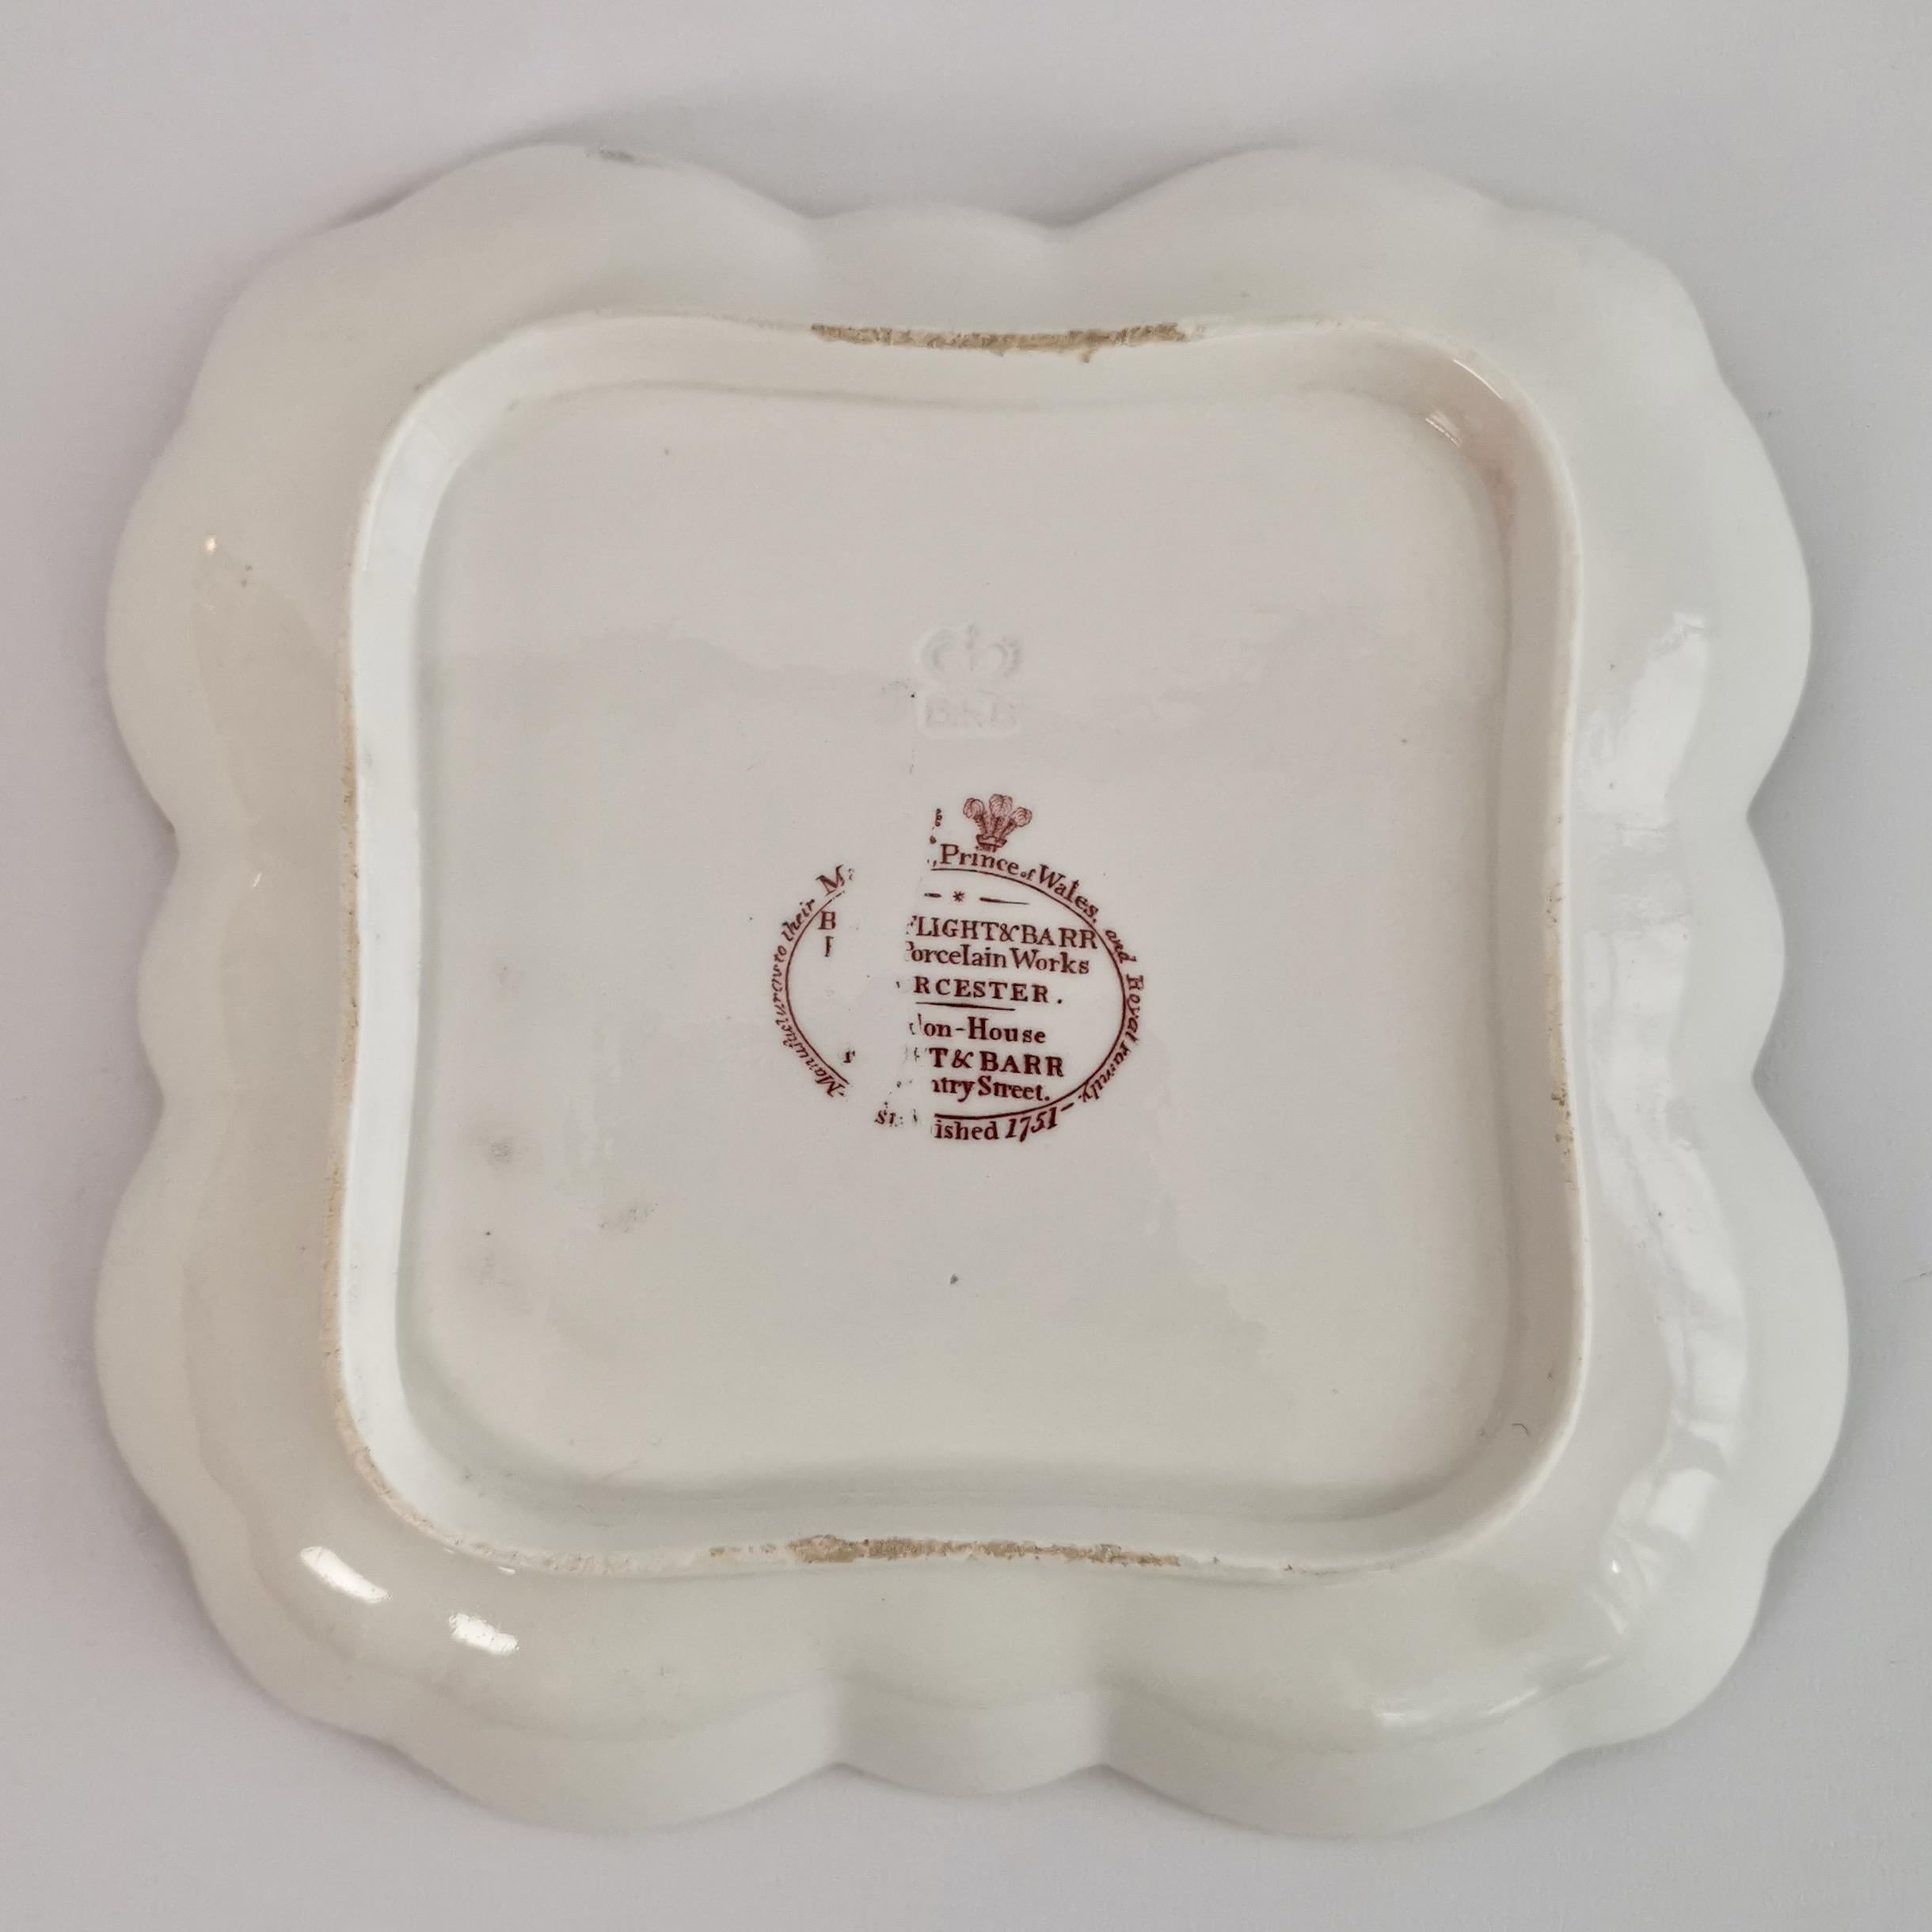 Square Porcelain Dish, Barr Flight & Barr, Dragons in Compartments, 1807-1813 7